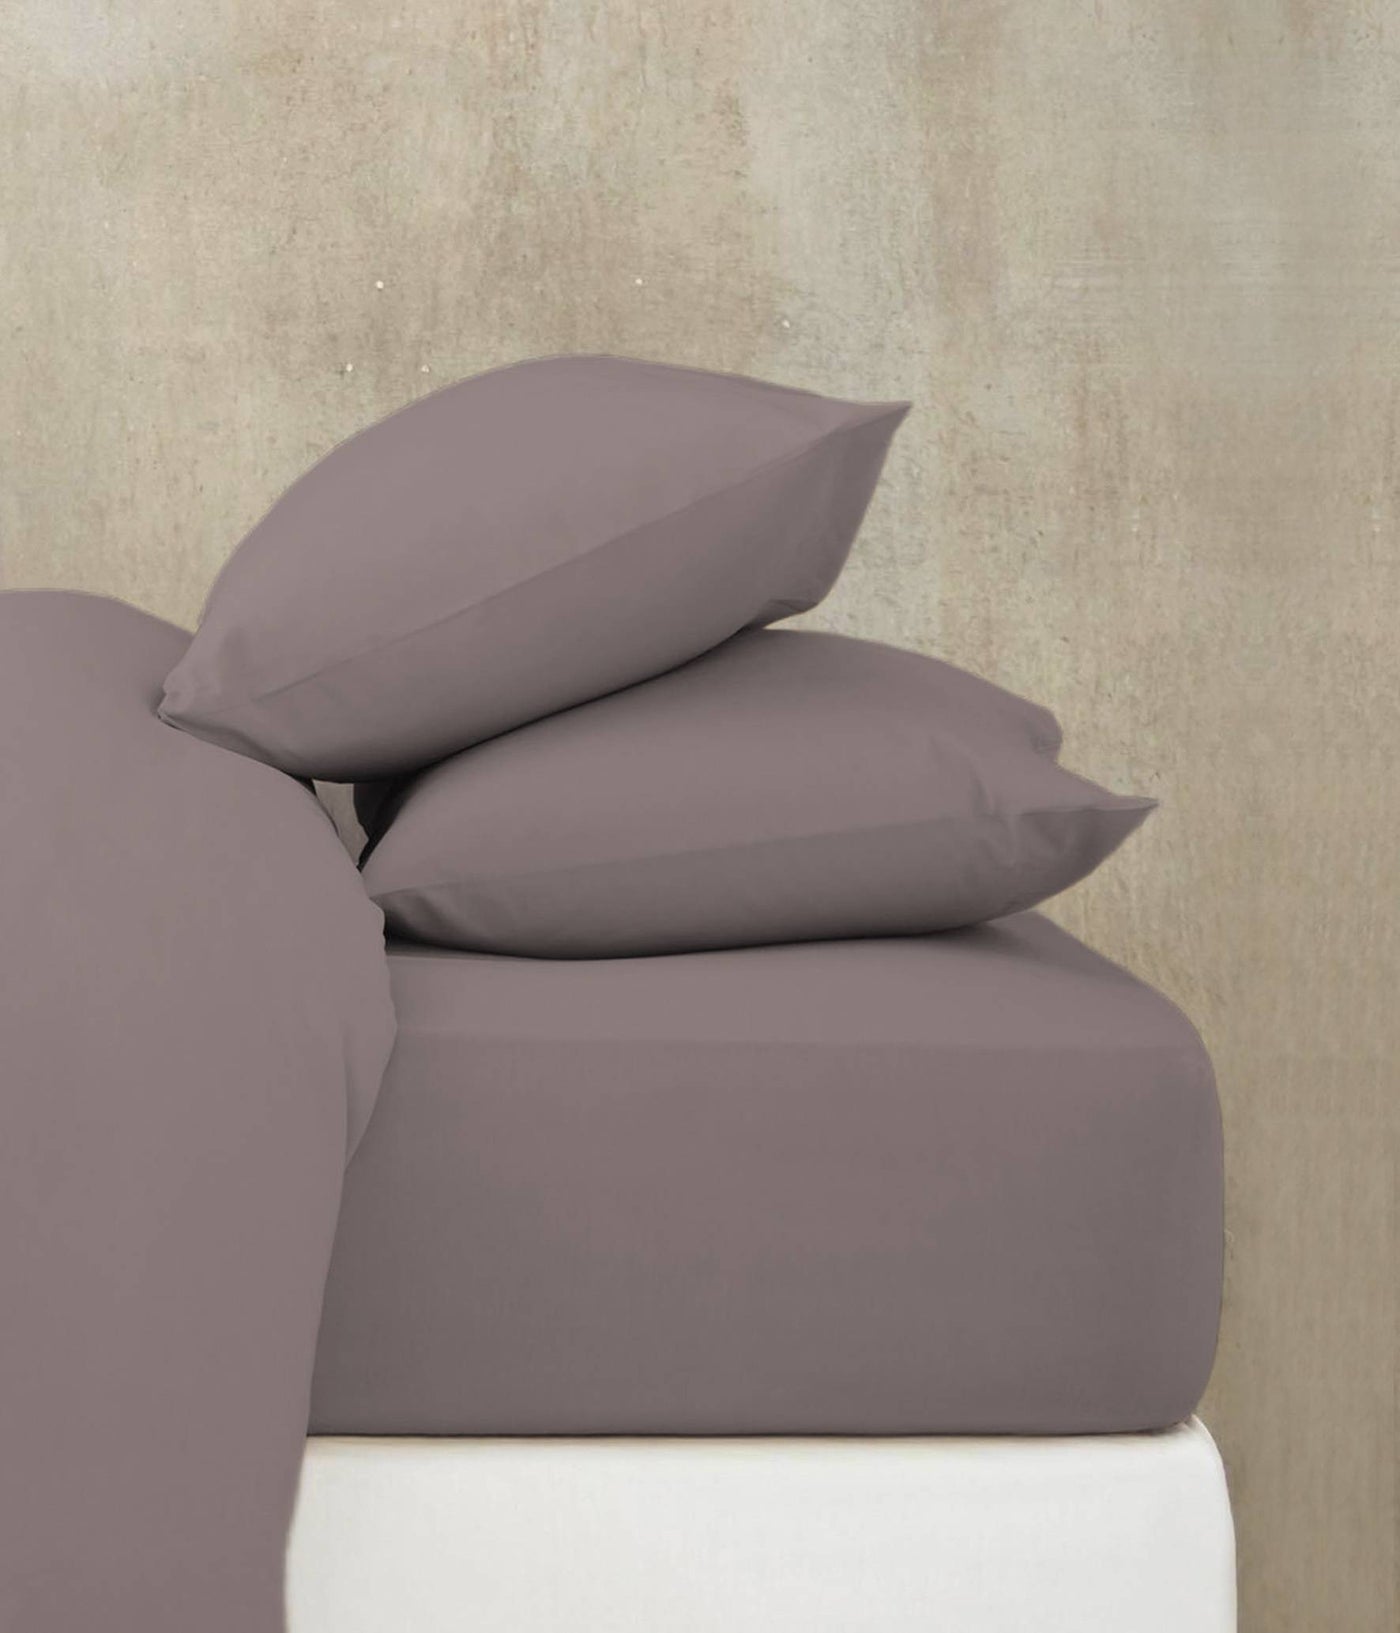 Fitted sheet Toscana